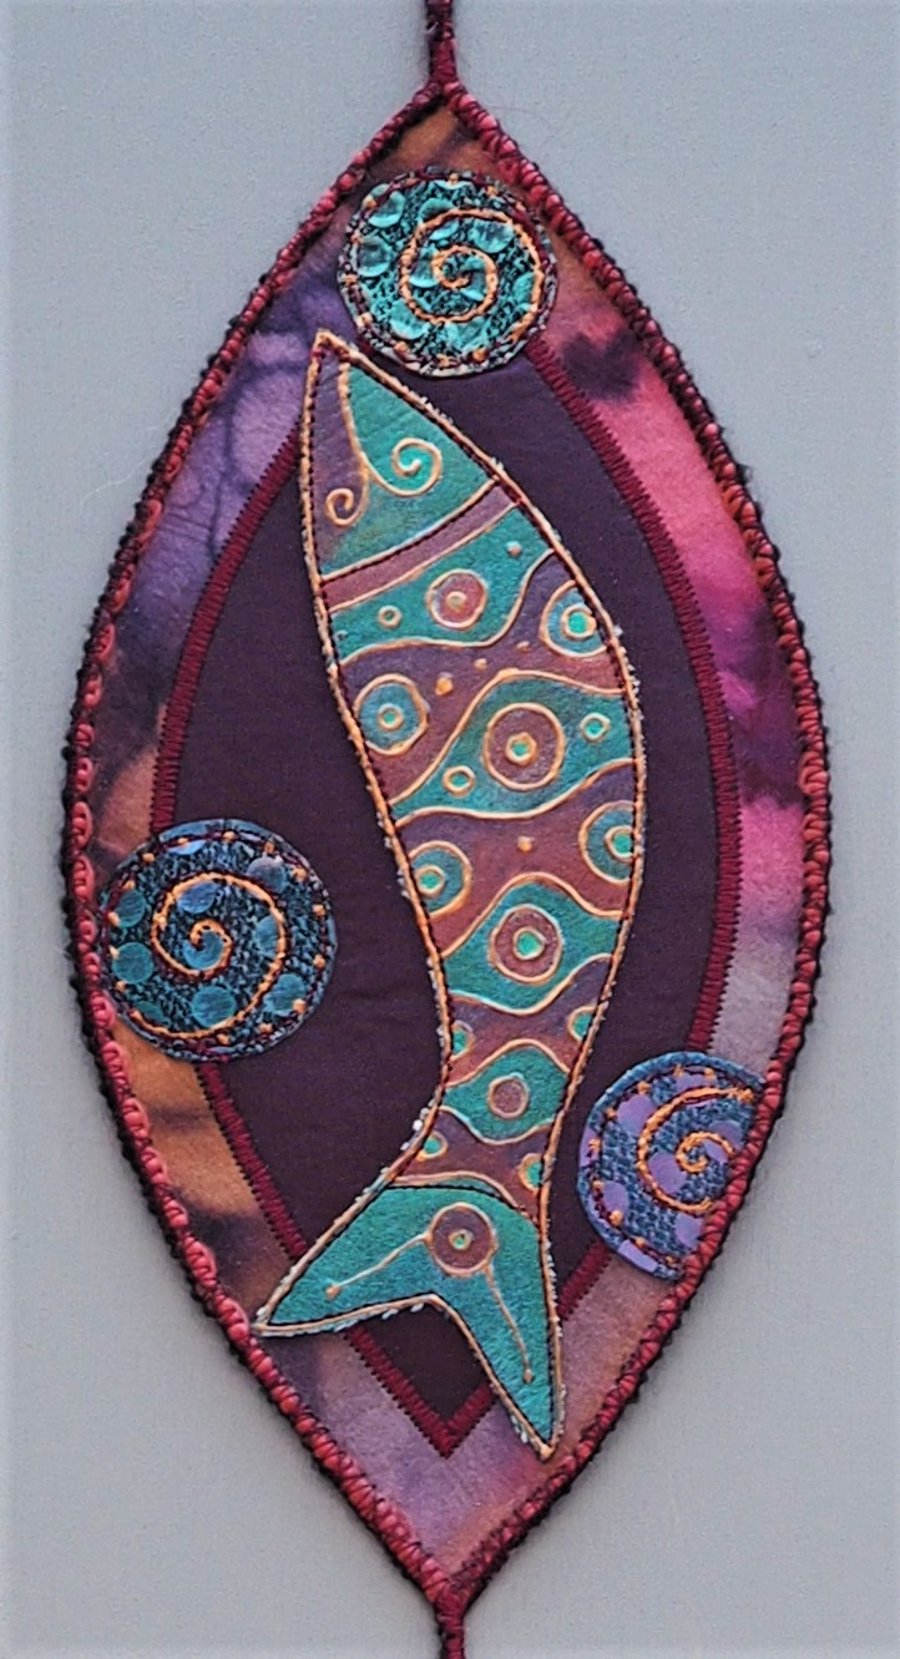 FSP009 - Fish Shield Wallhanging - aubergine - teal green - copper - 22.5cm (9")